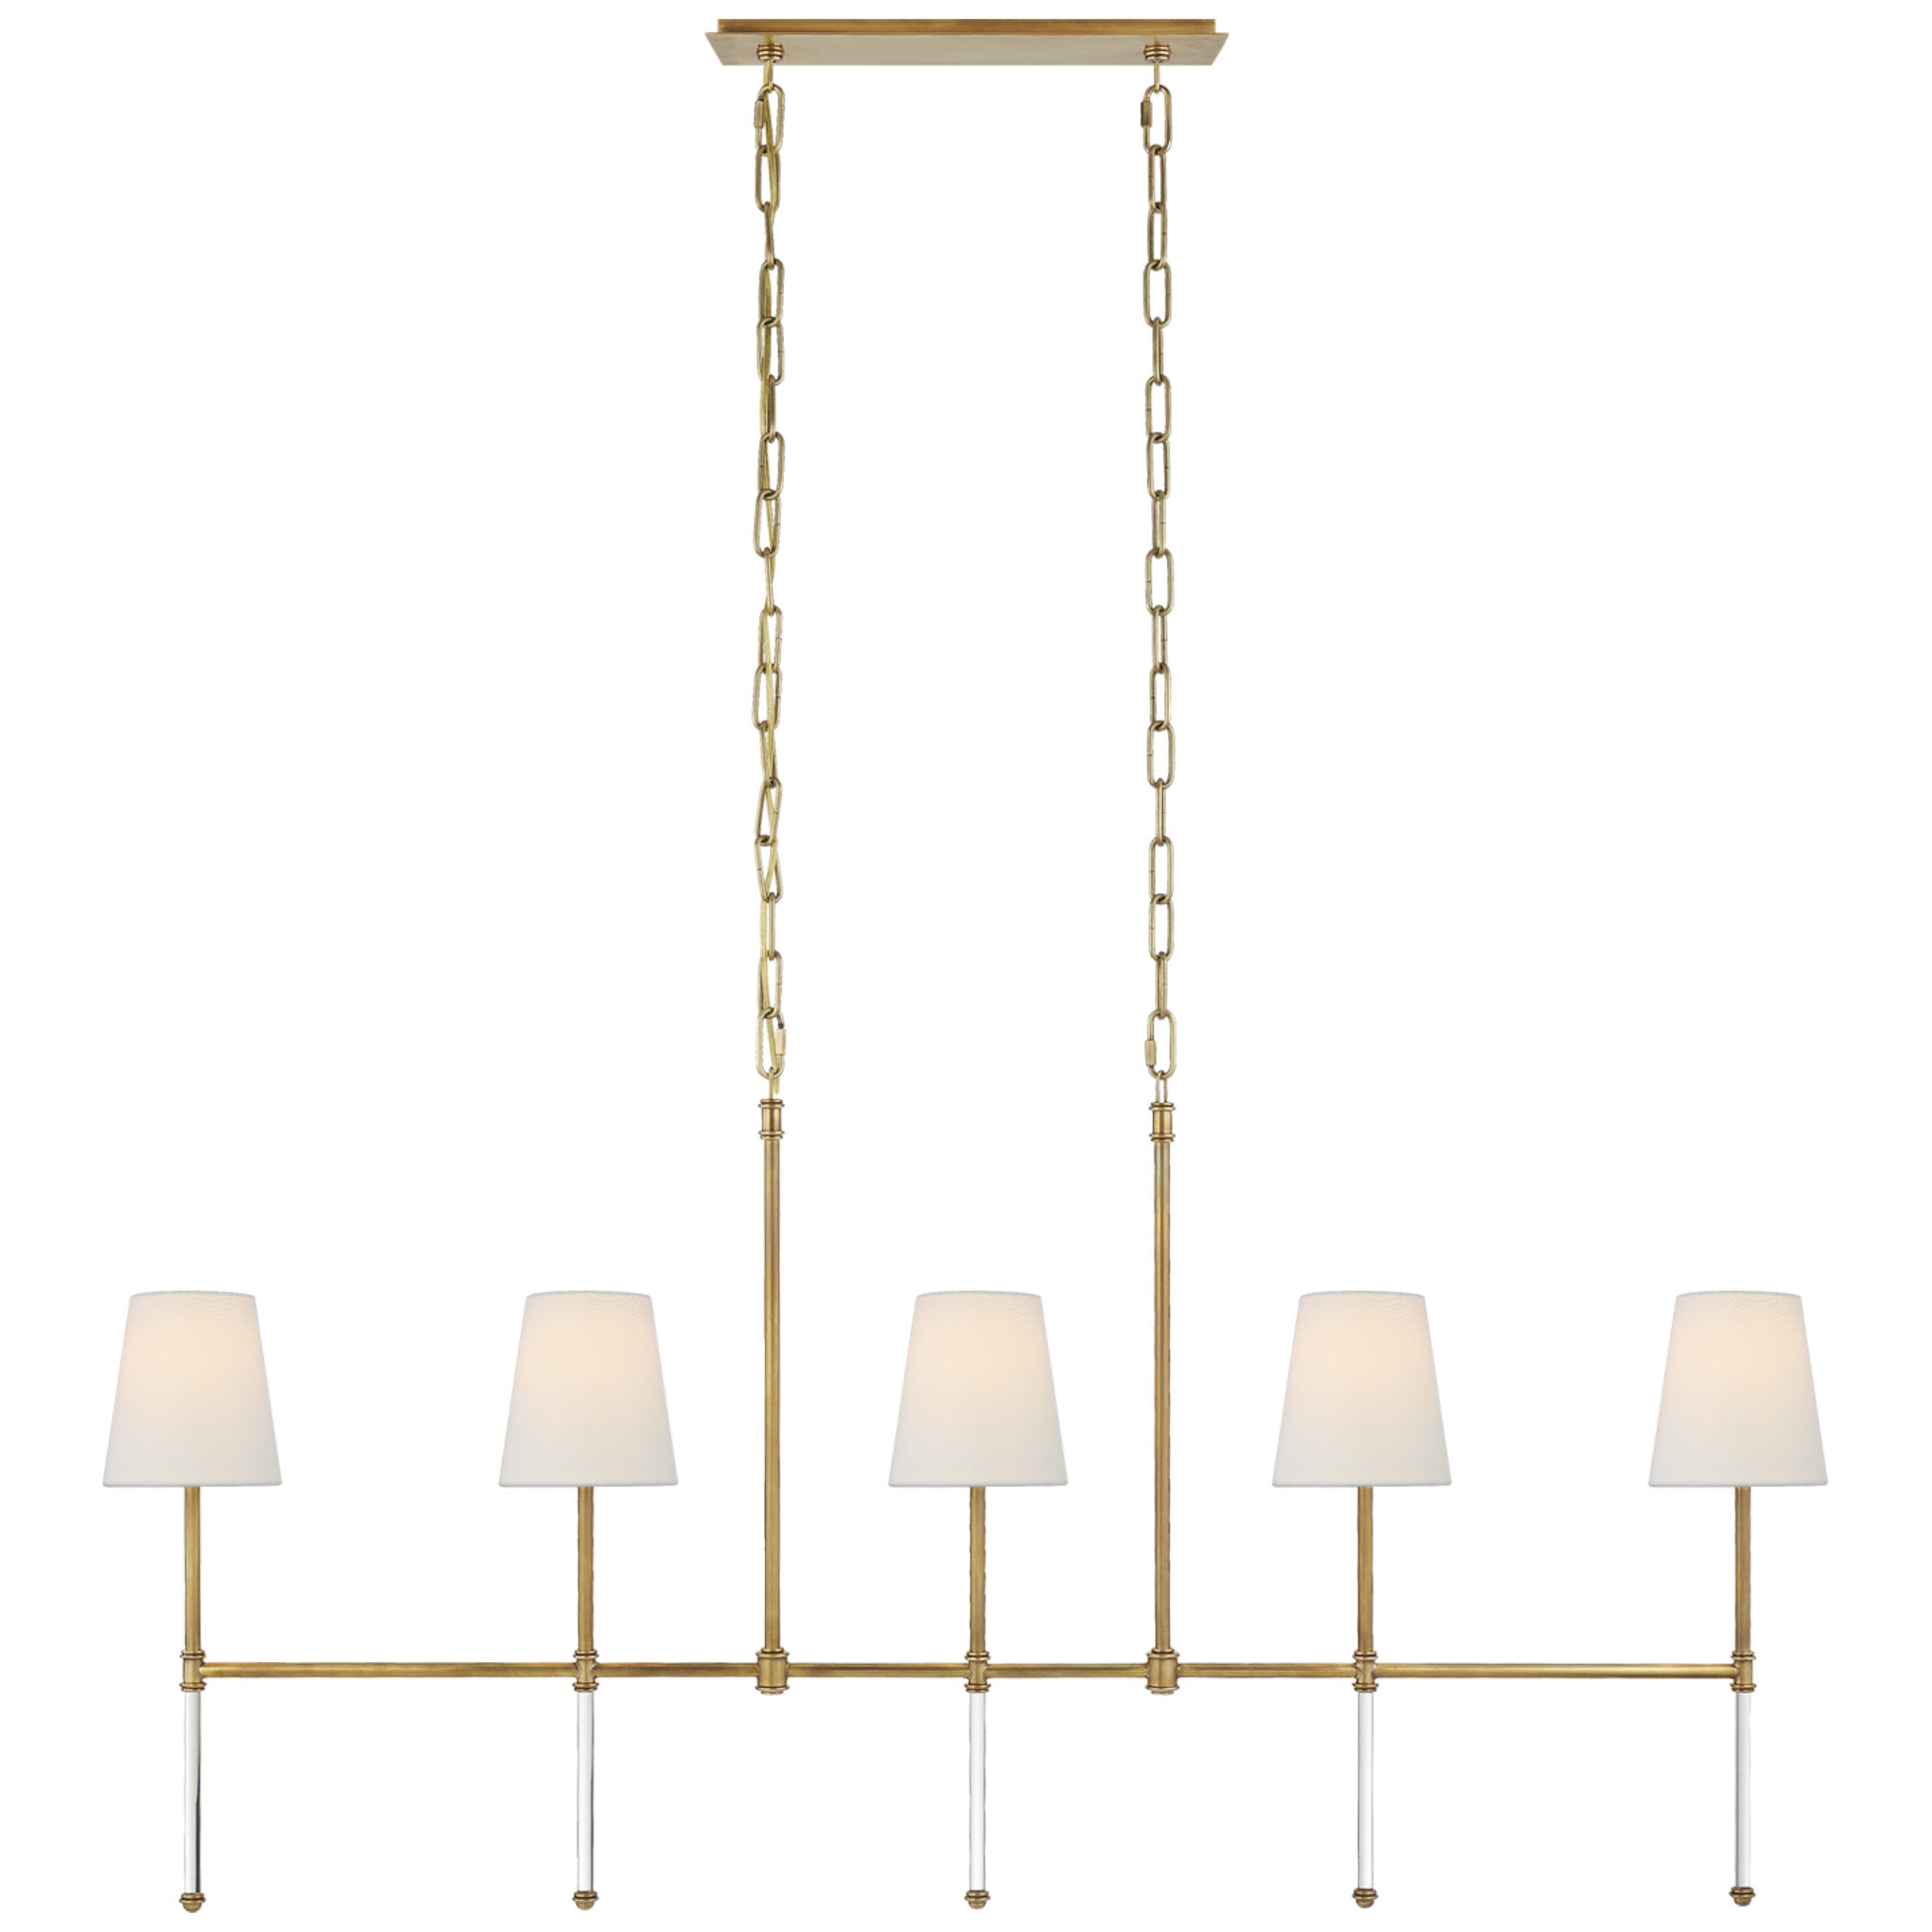 Suzanne Kasler Camille Medium Linear Chandelier in Hand-Rubbed Antique Brass with Linen Shades